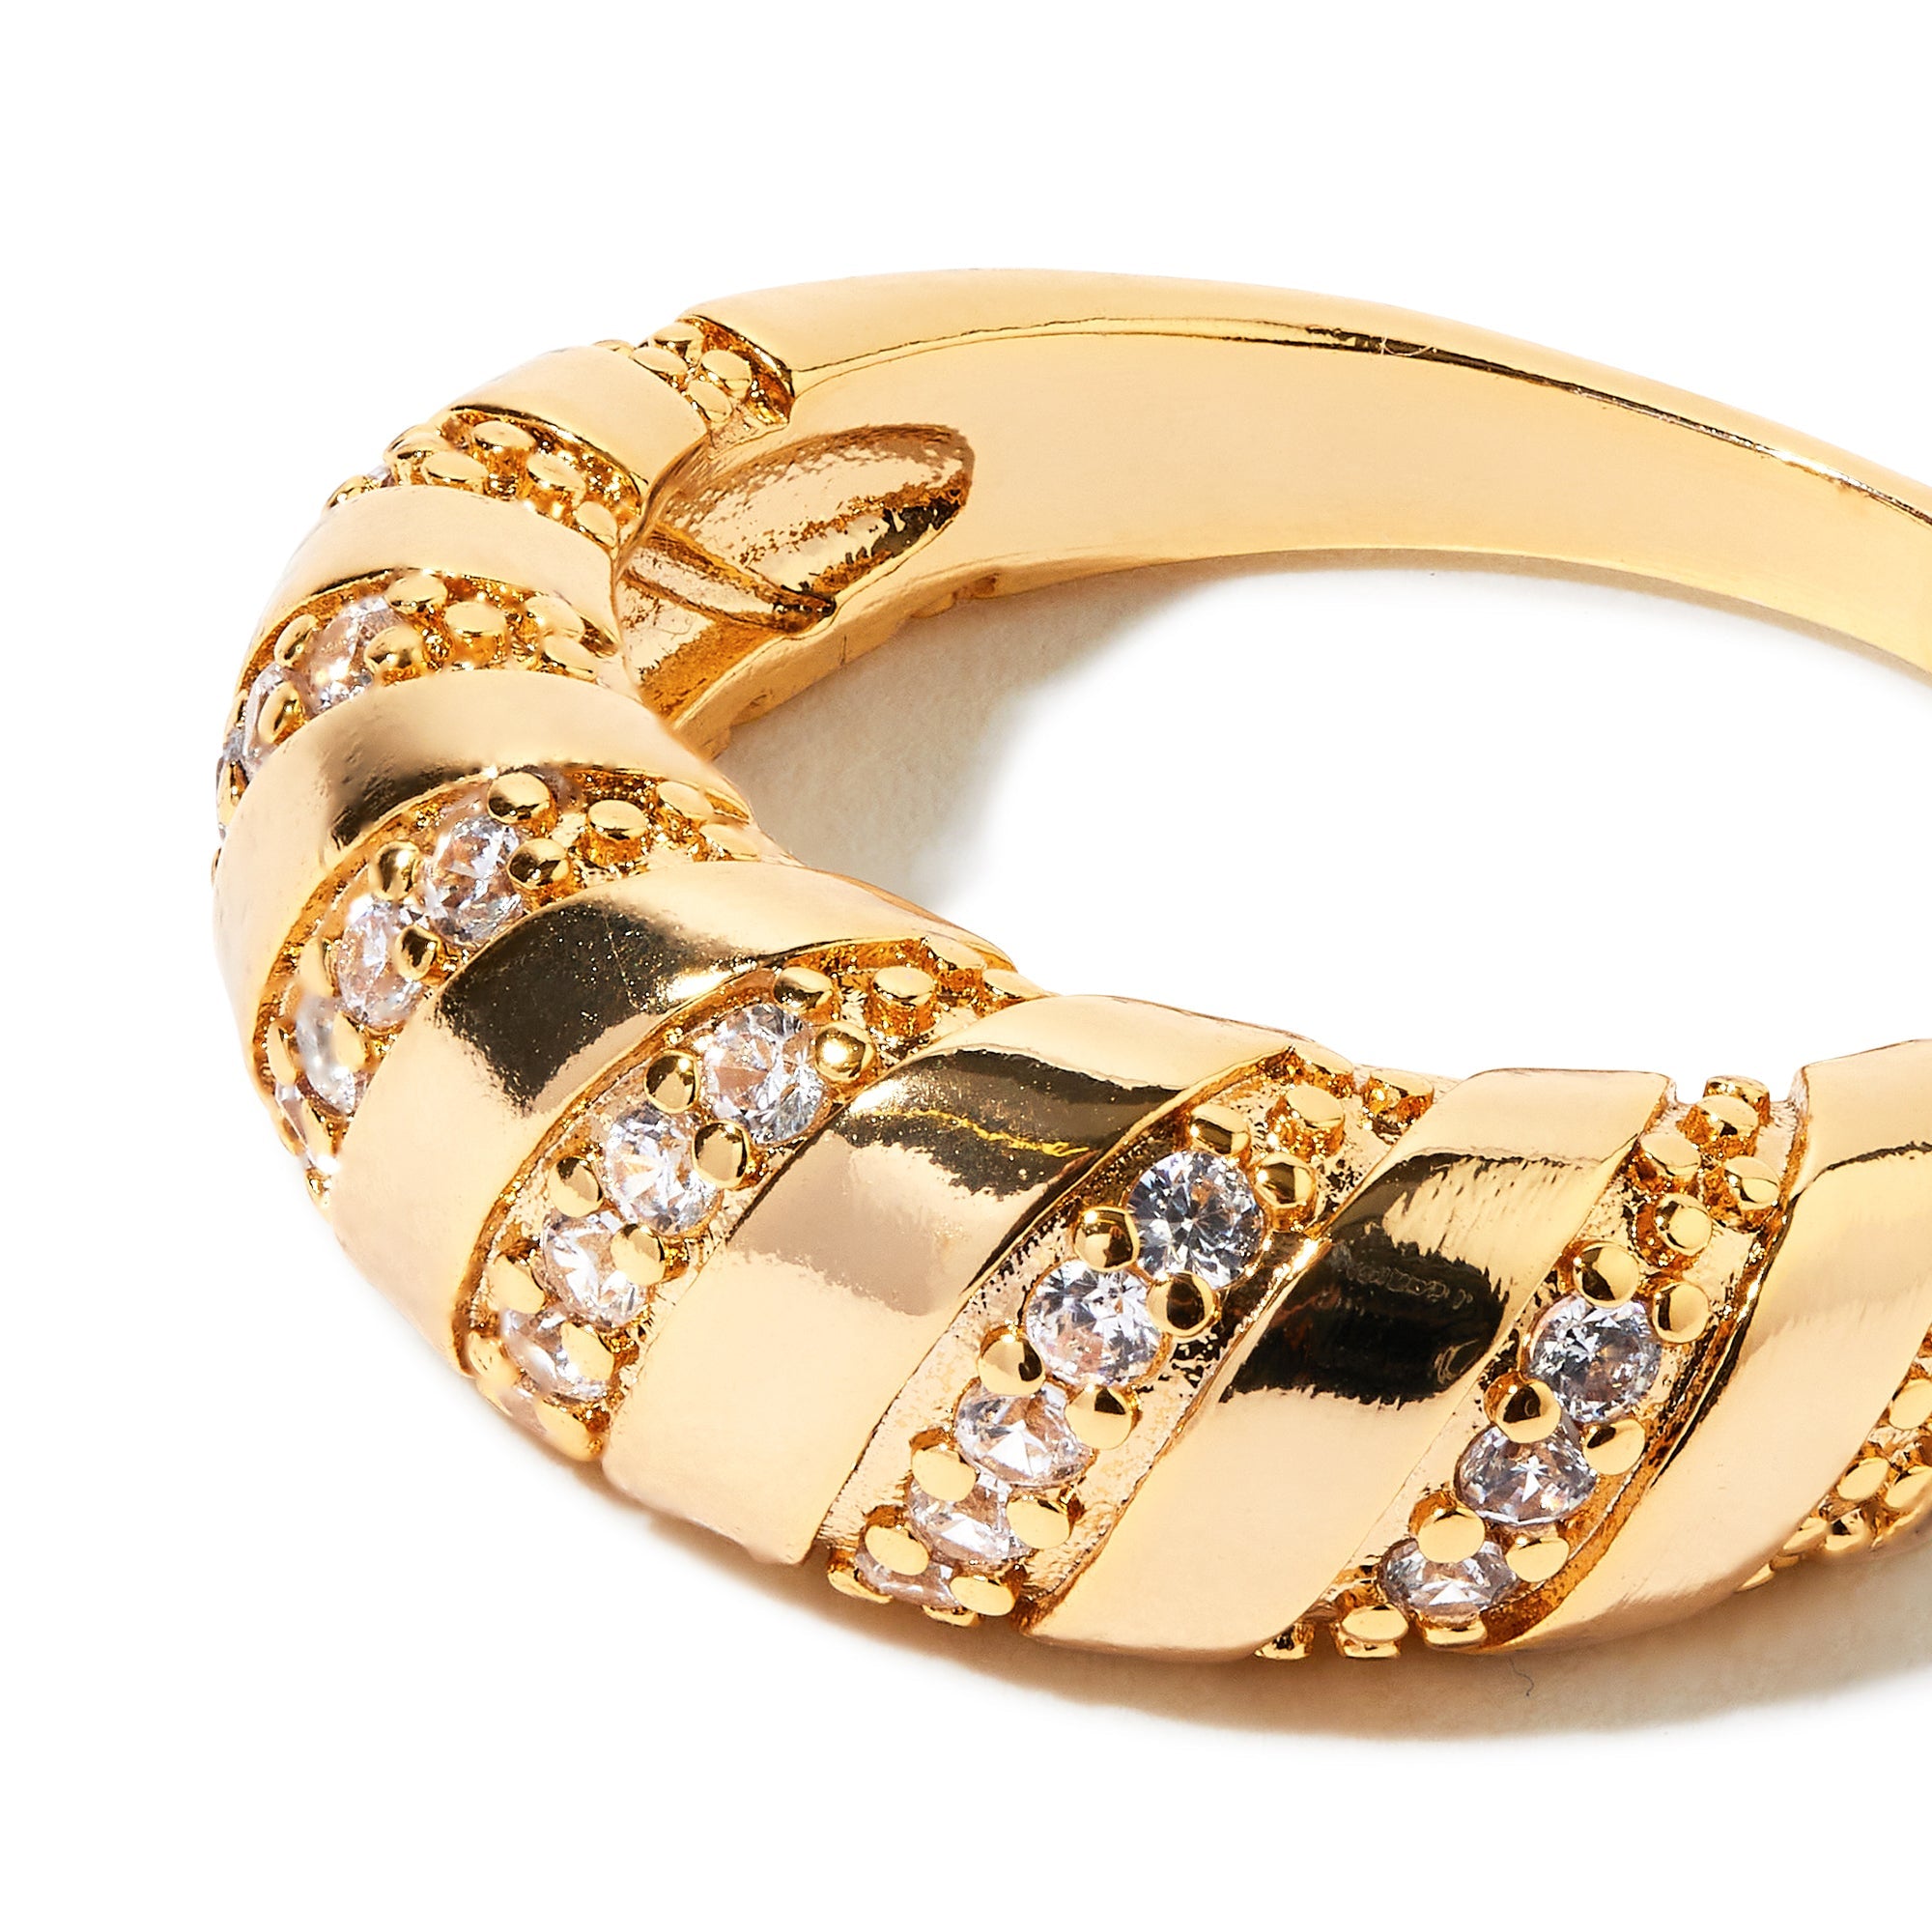 Real Gold Plated Sparkle Croissant Ring For Women By Accessorize London Small